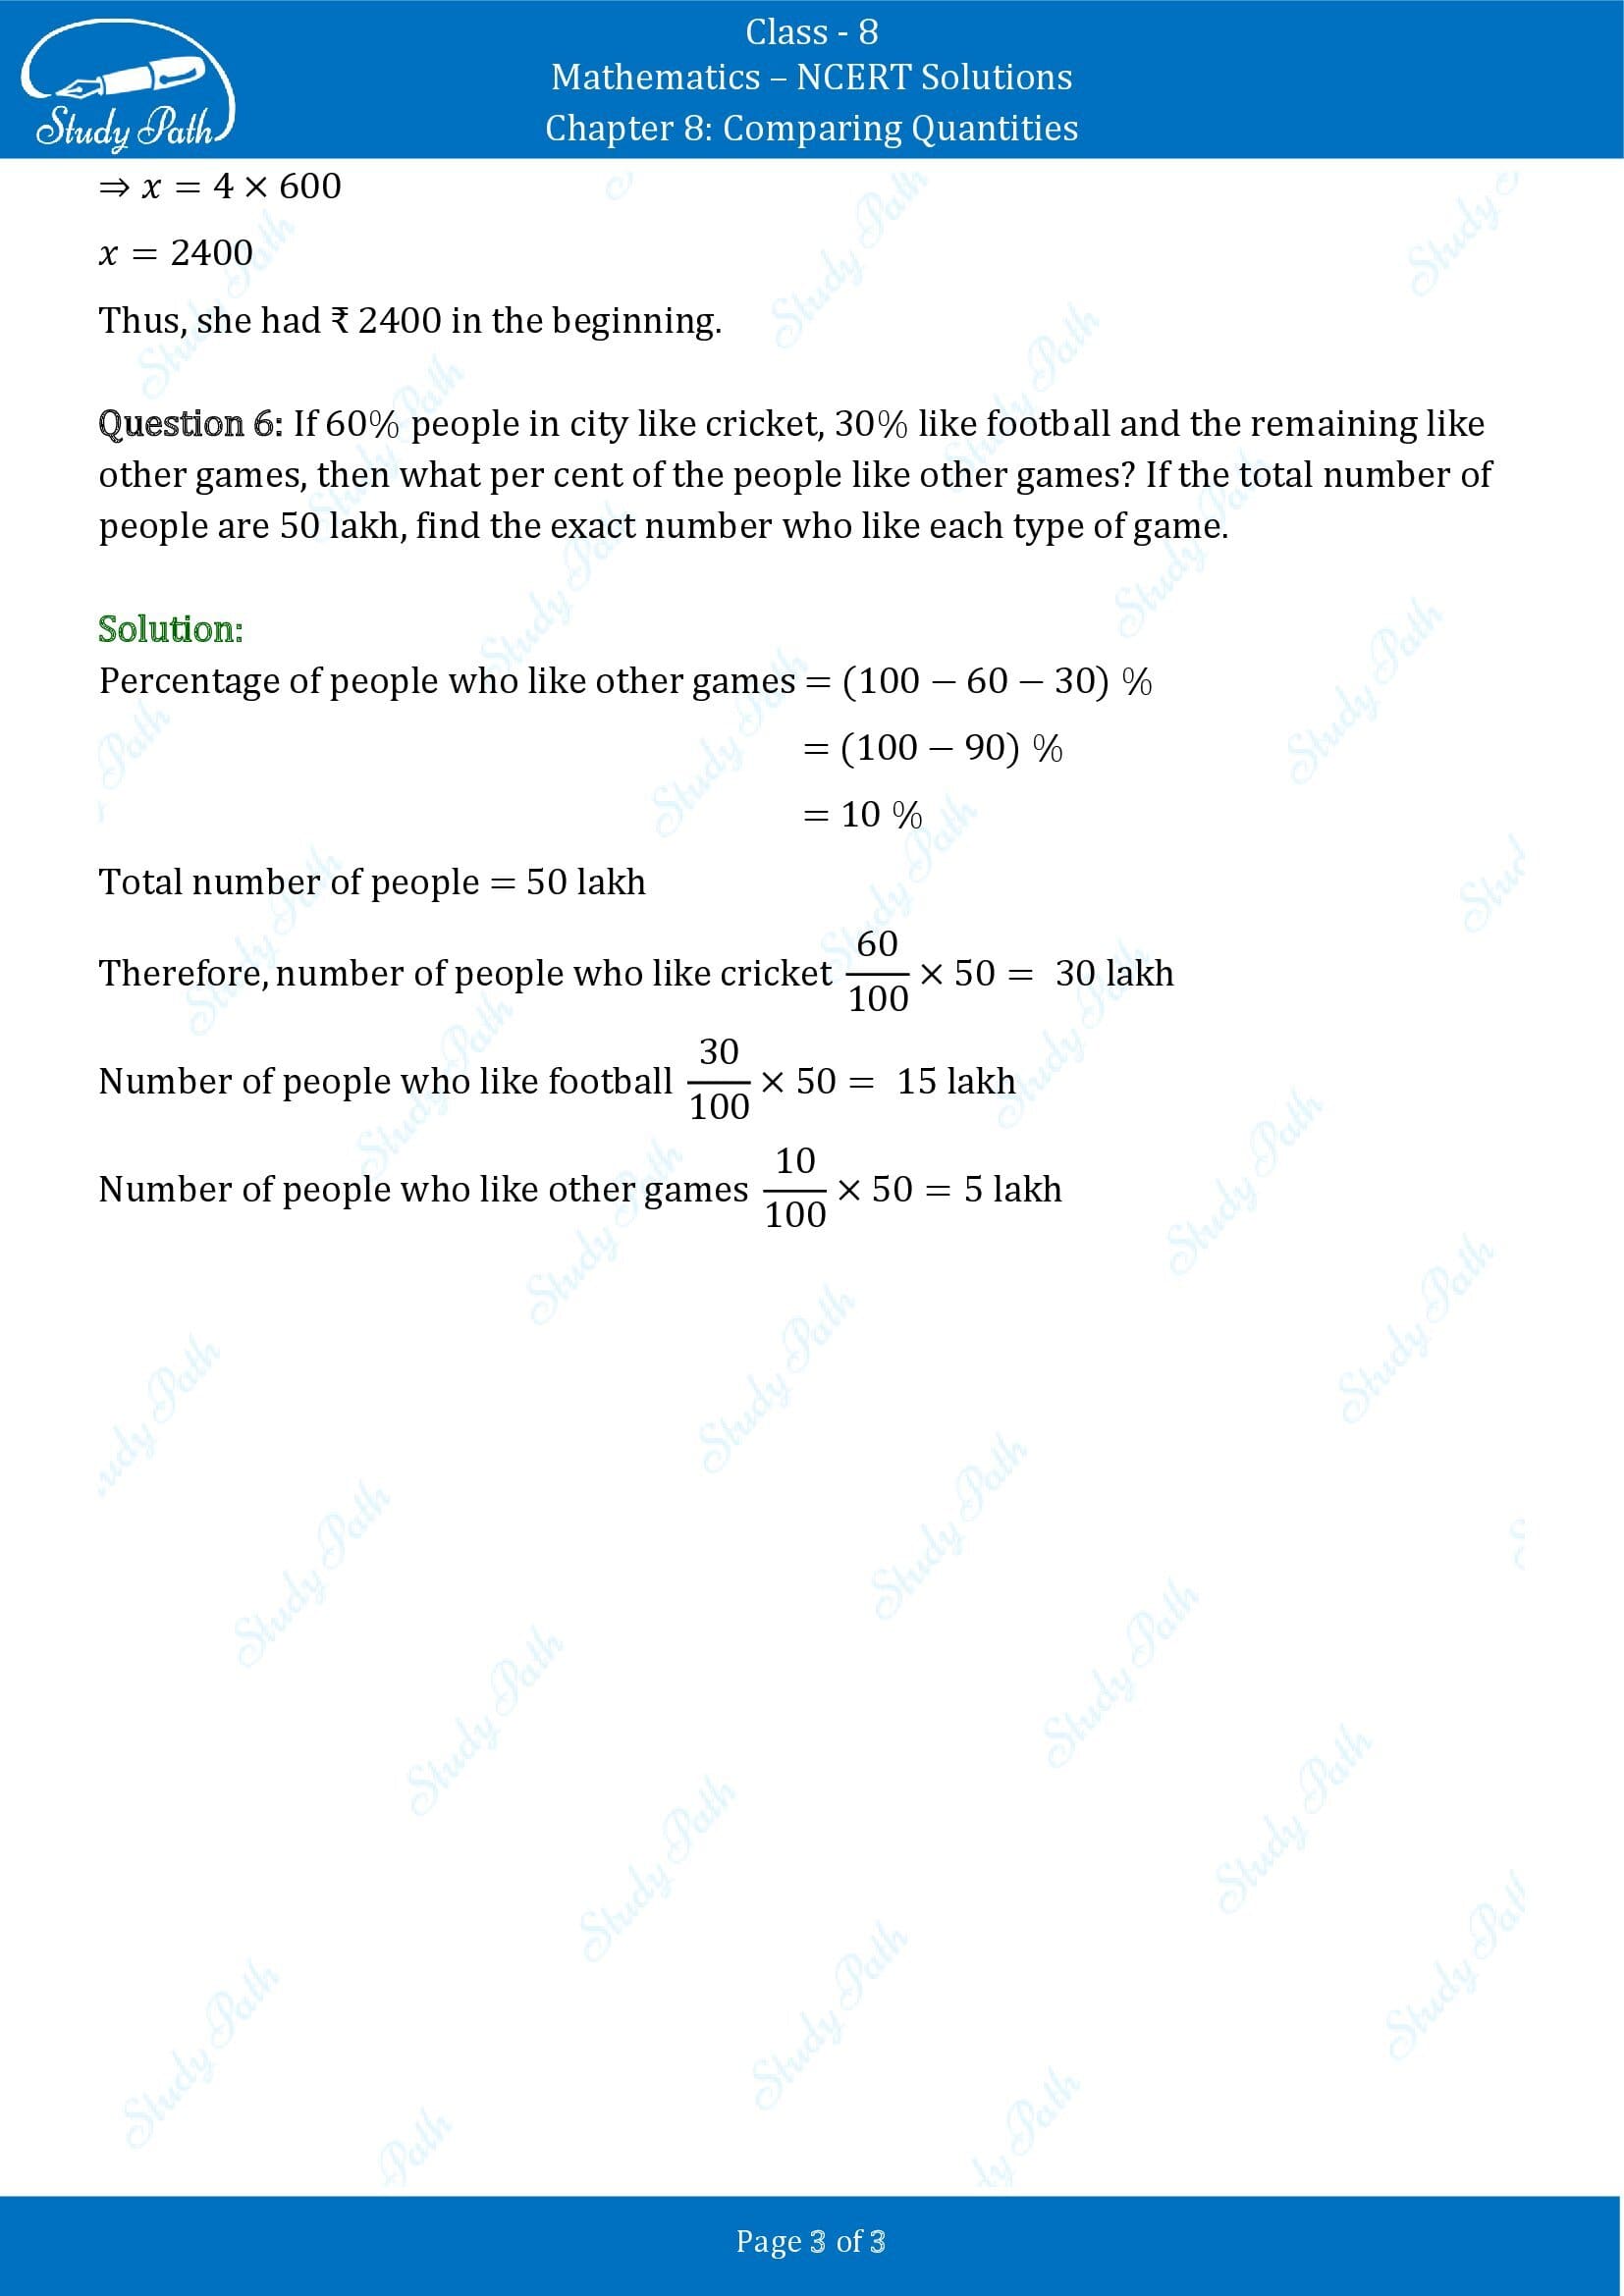 NCERT Solutions for Class 8 Maths Chapter 8 Comparing Quantities Exercise 8.1 00003